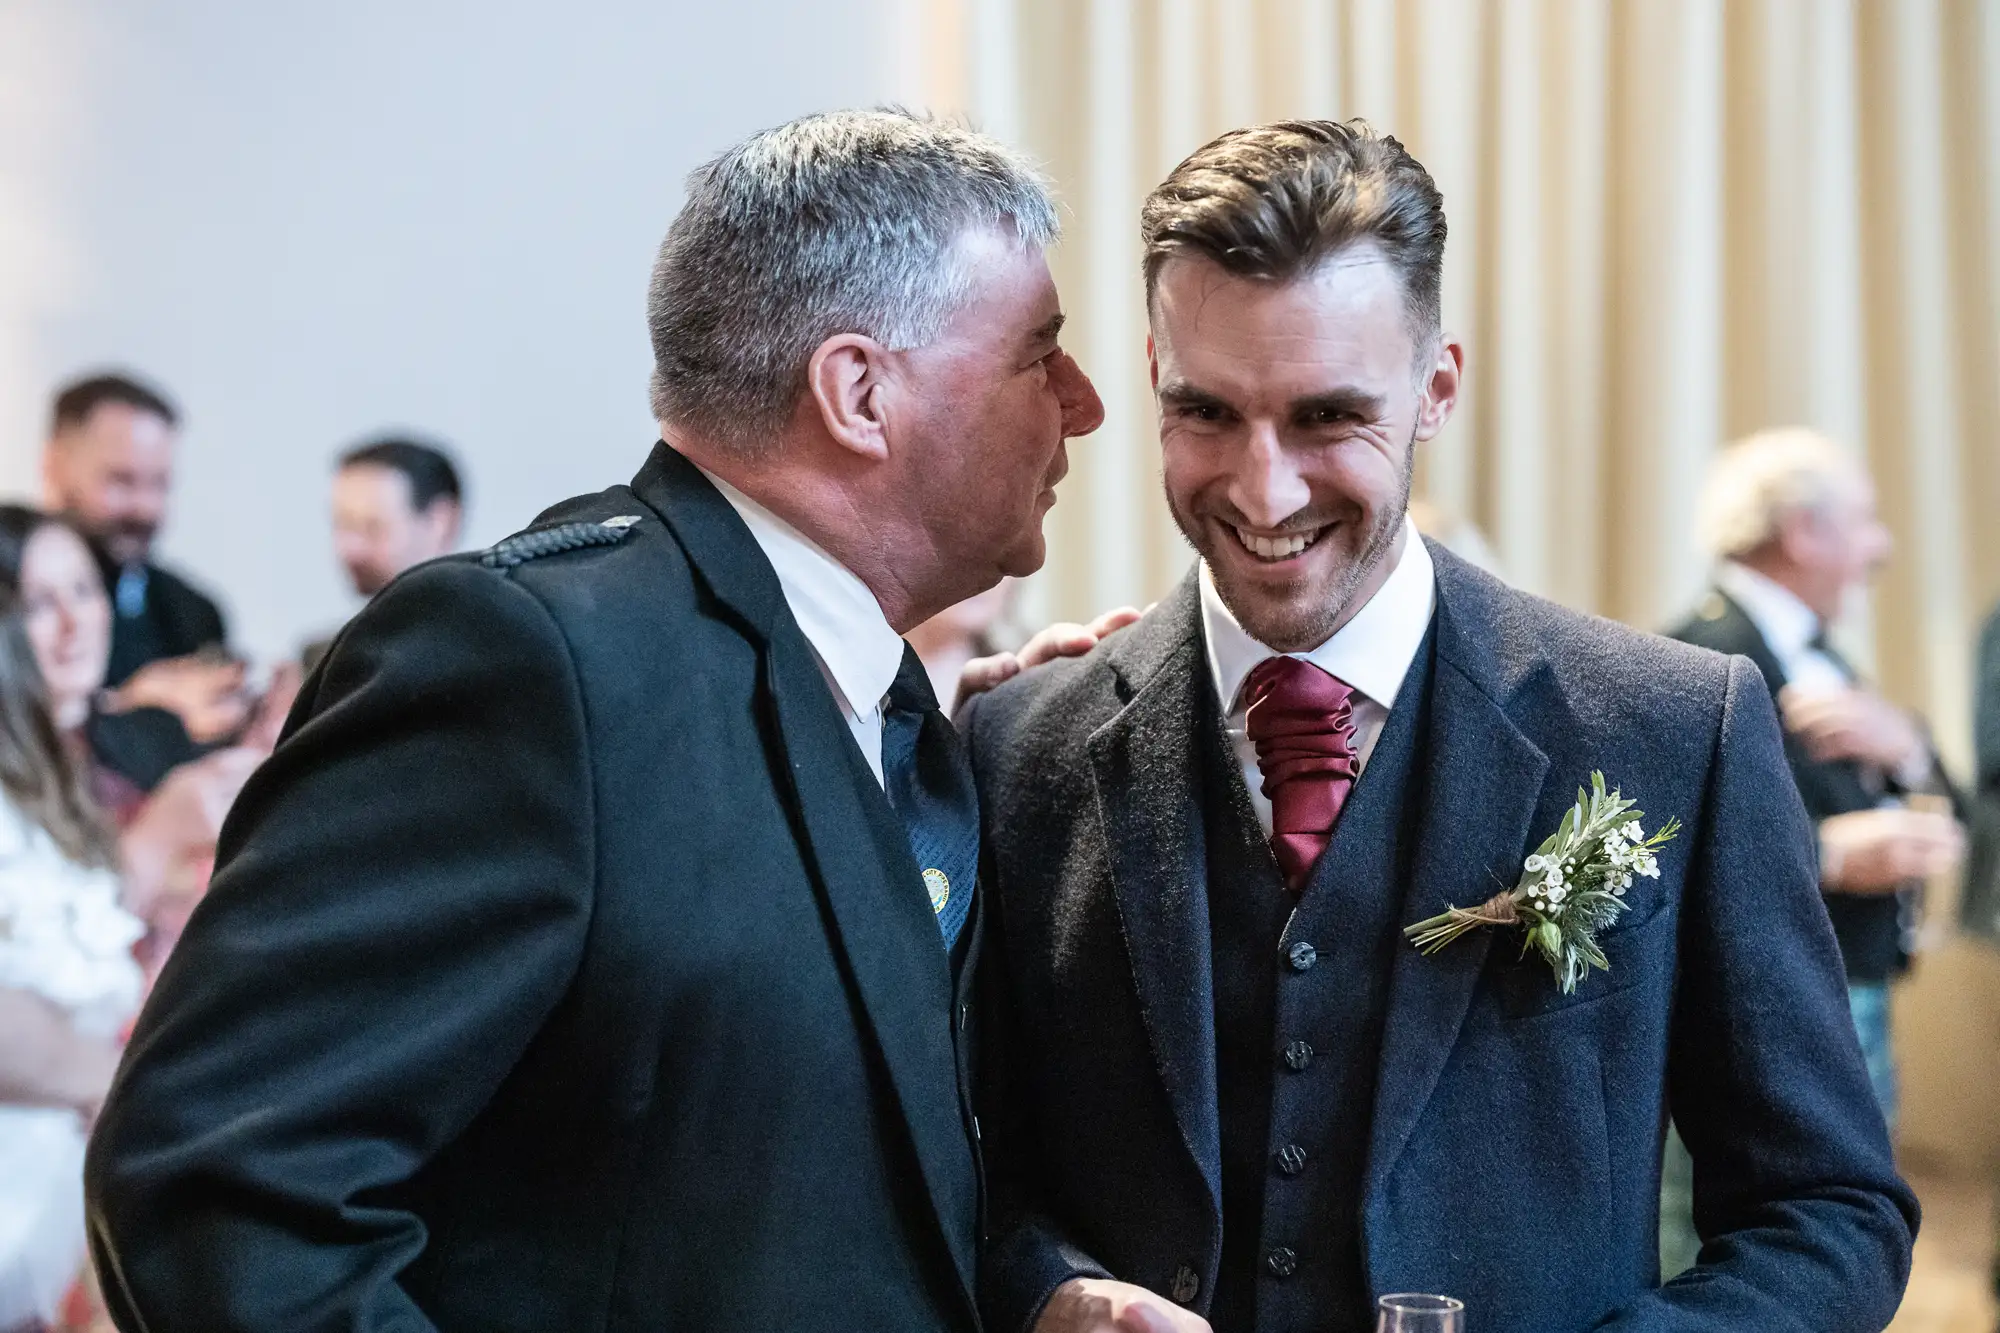 Two men smiling at each other at a wedding, one in a kilt and the other in a suit, both wearing boutonnieres.